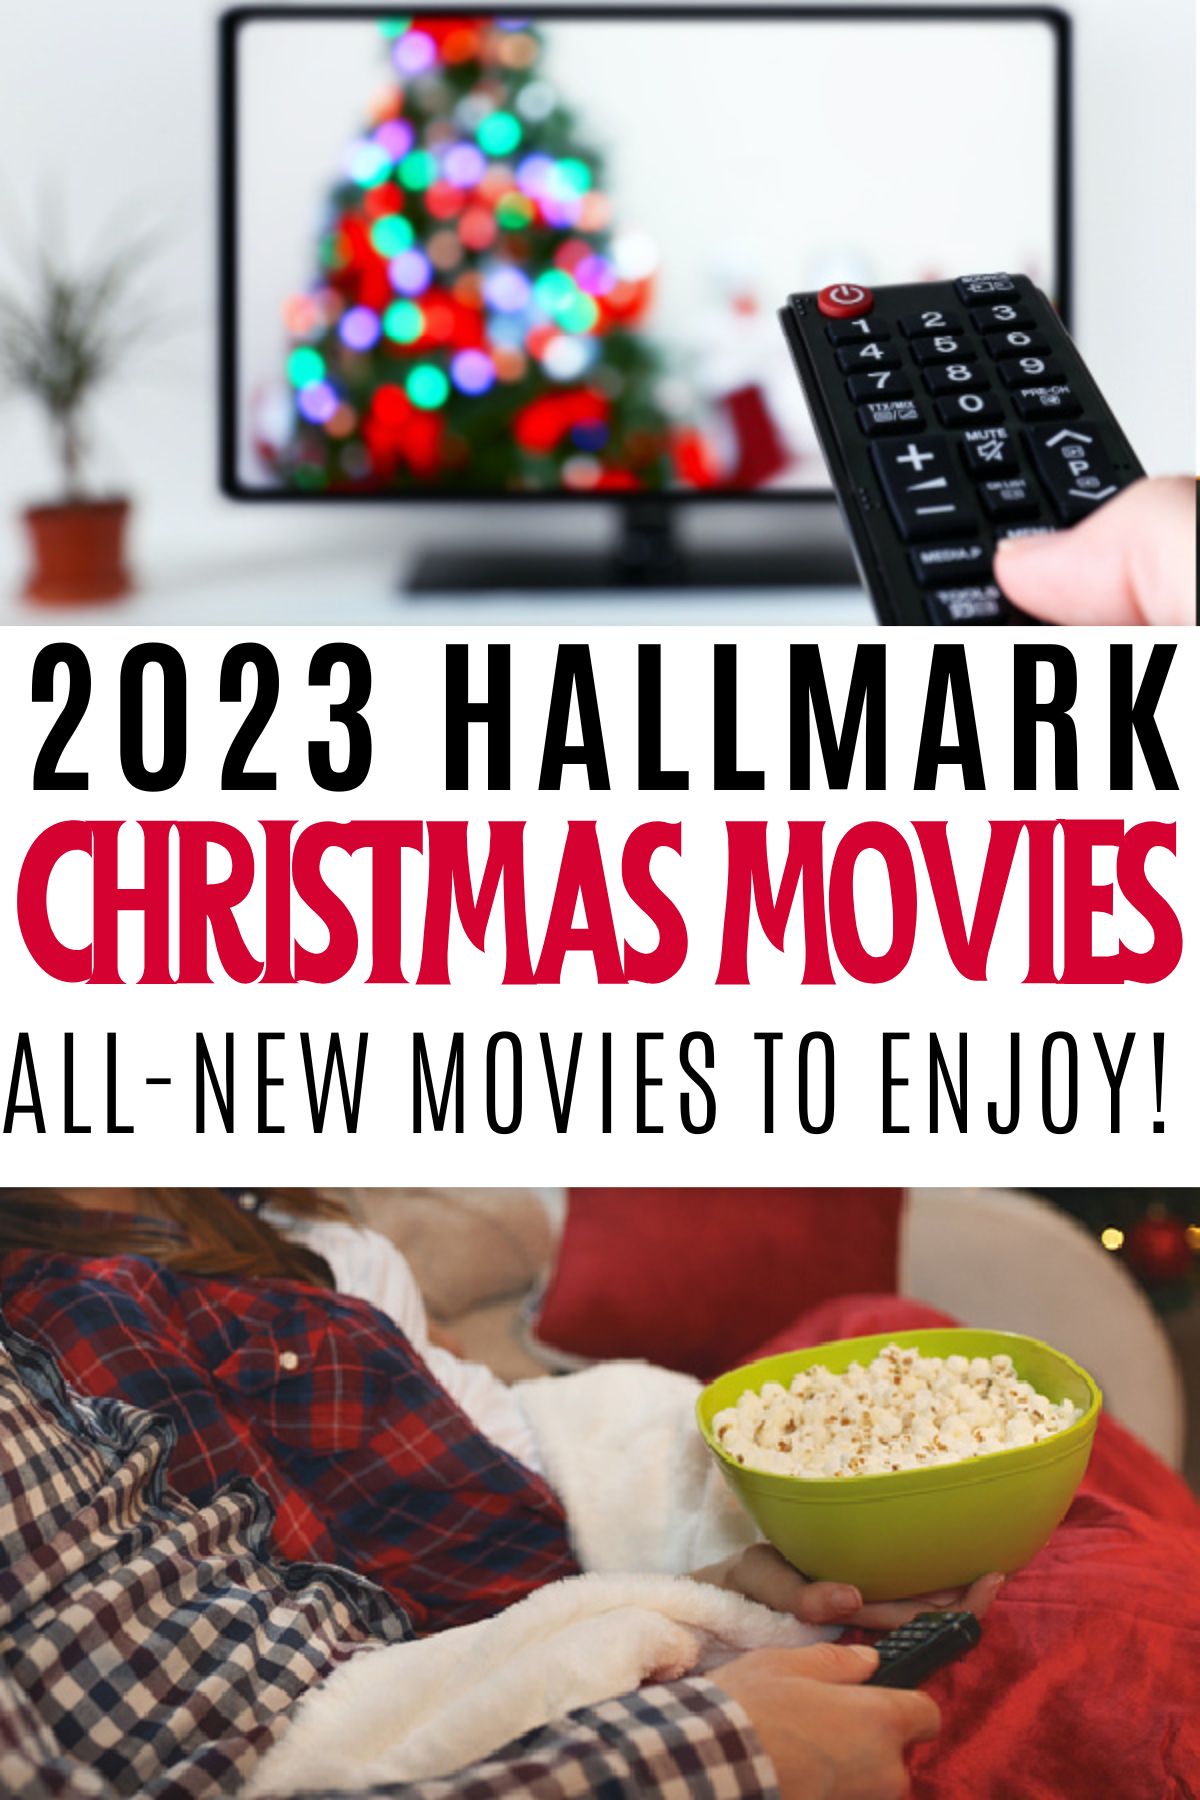 person pointing remote at tv with christmas movie on screen and people on sofa with popcorn